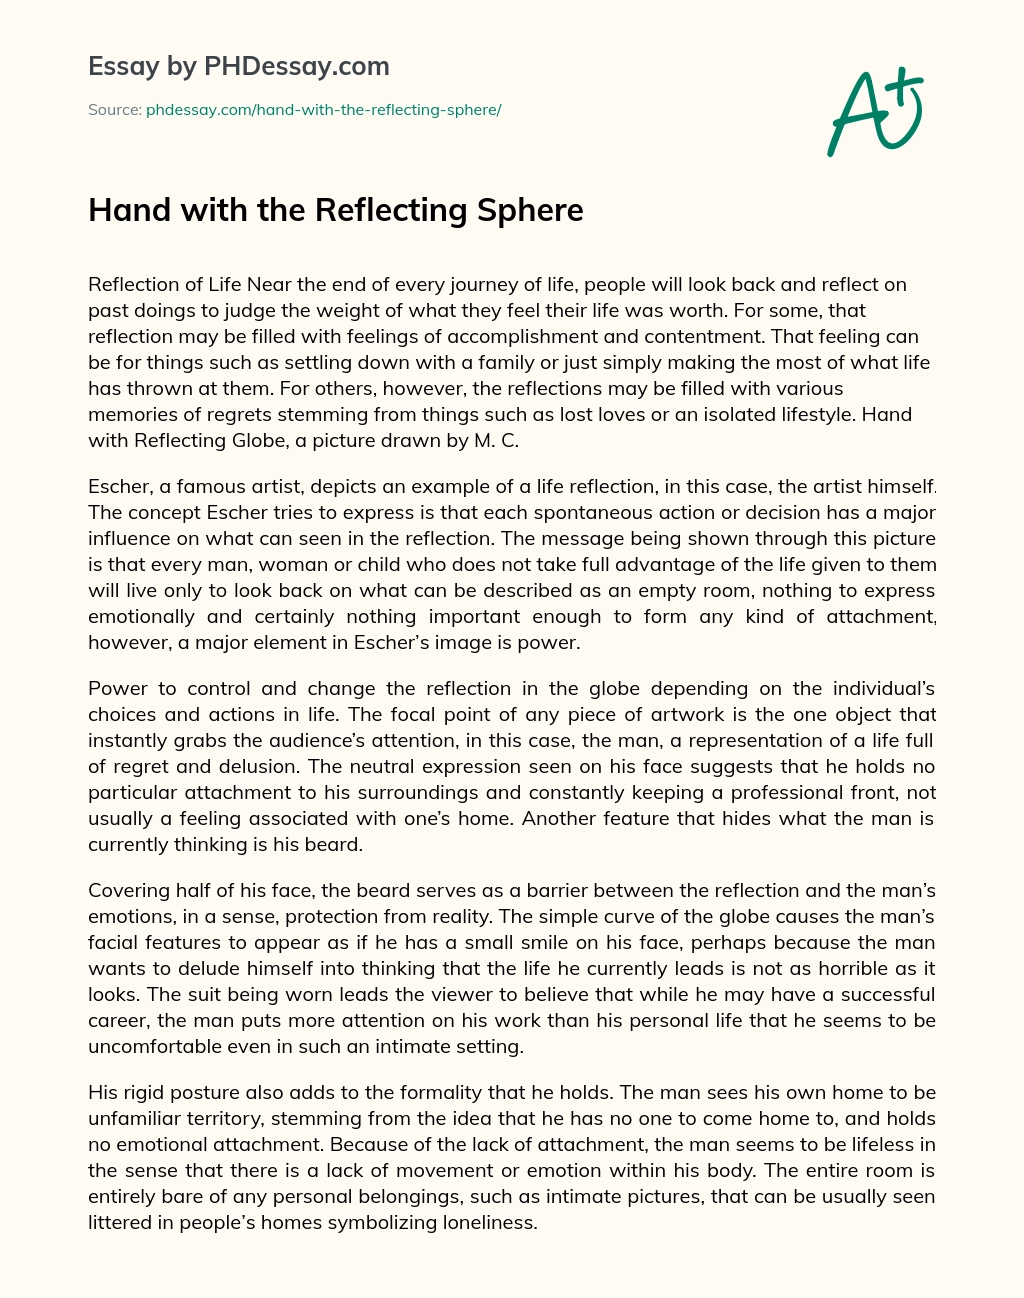 Hand with the Reflecting Sphere essay